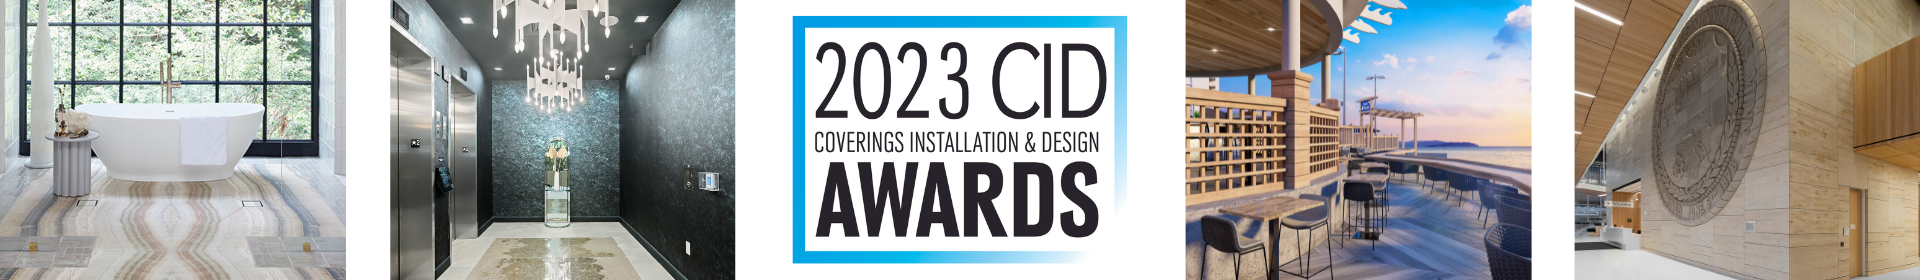 Coverings 2023 Event Banner